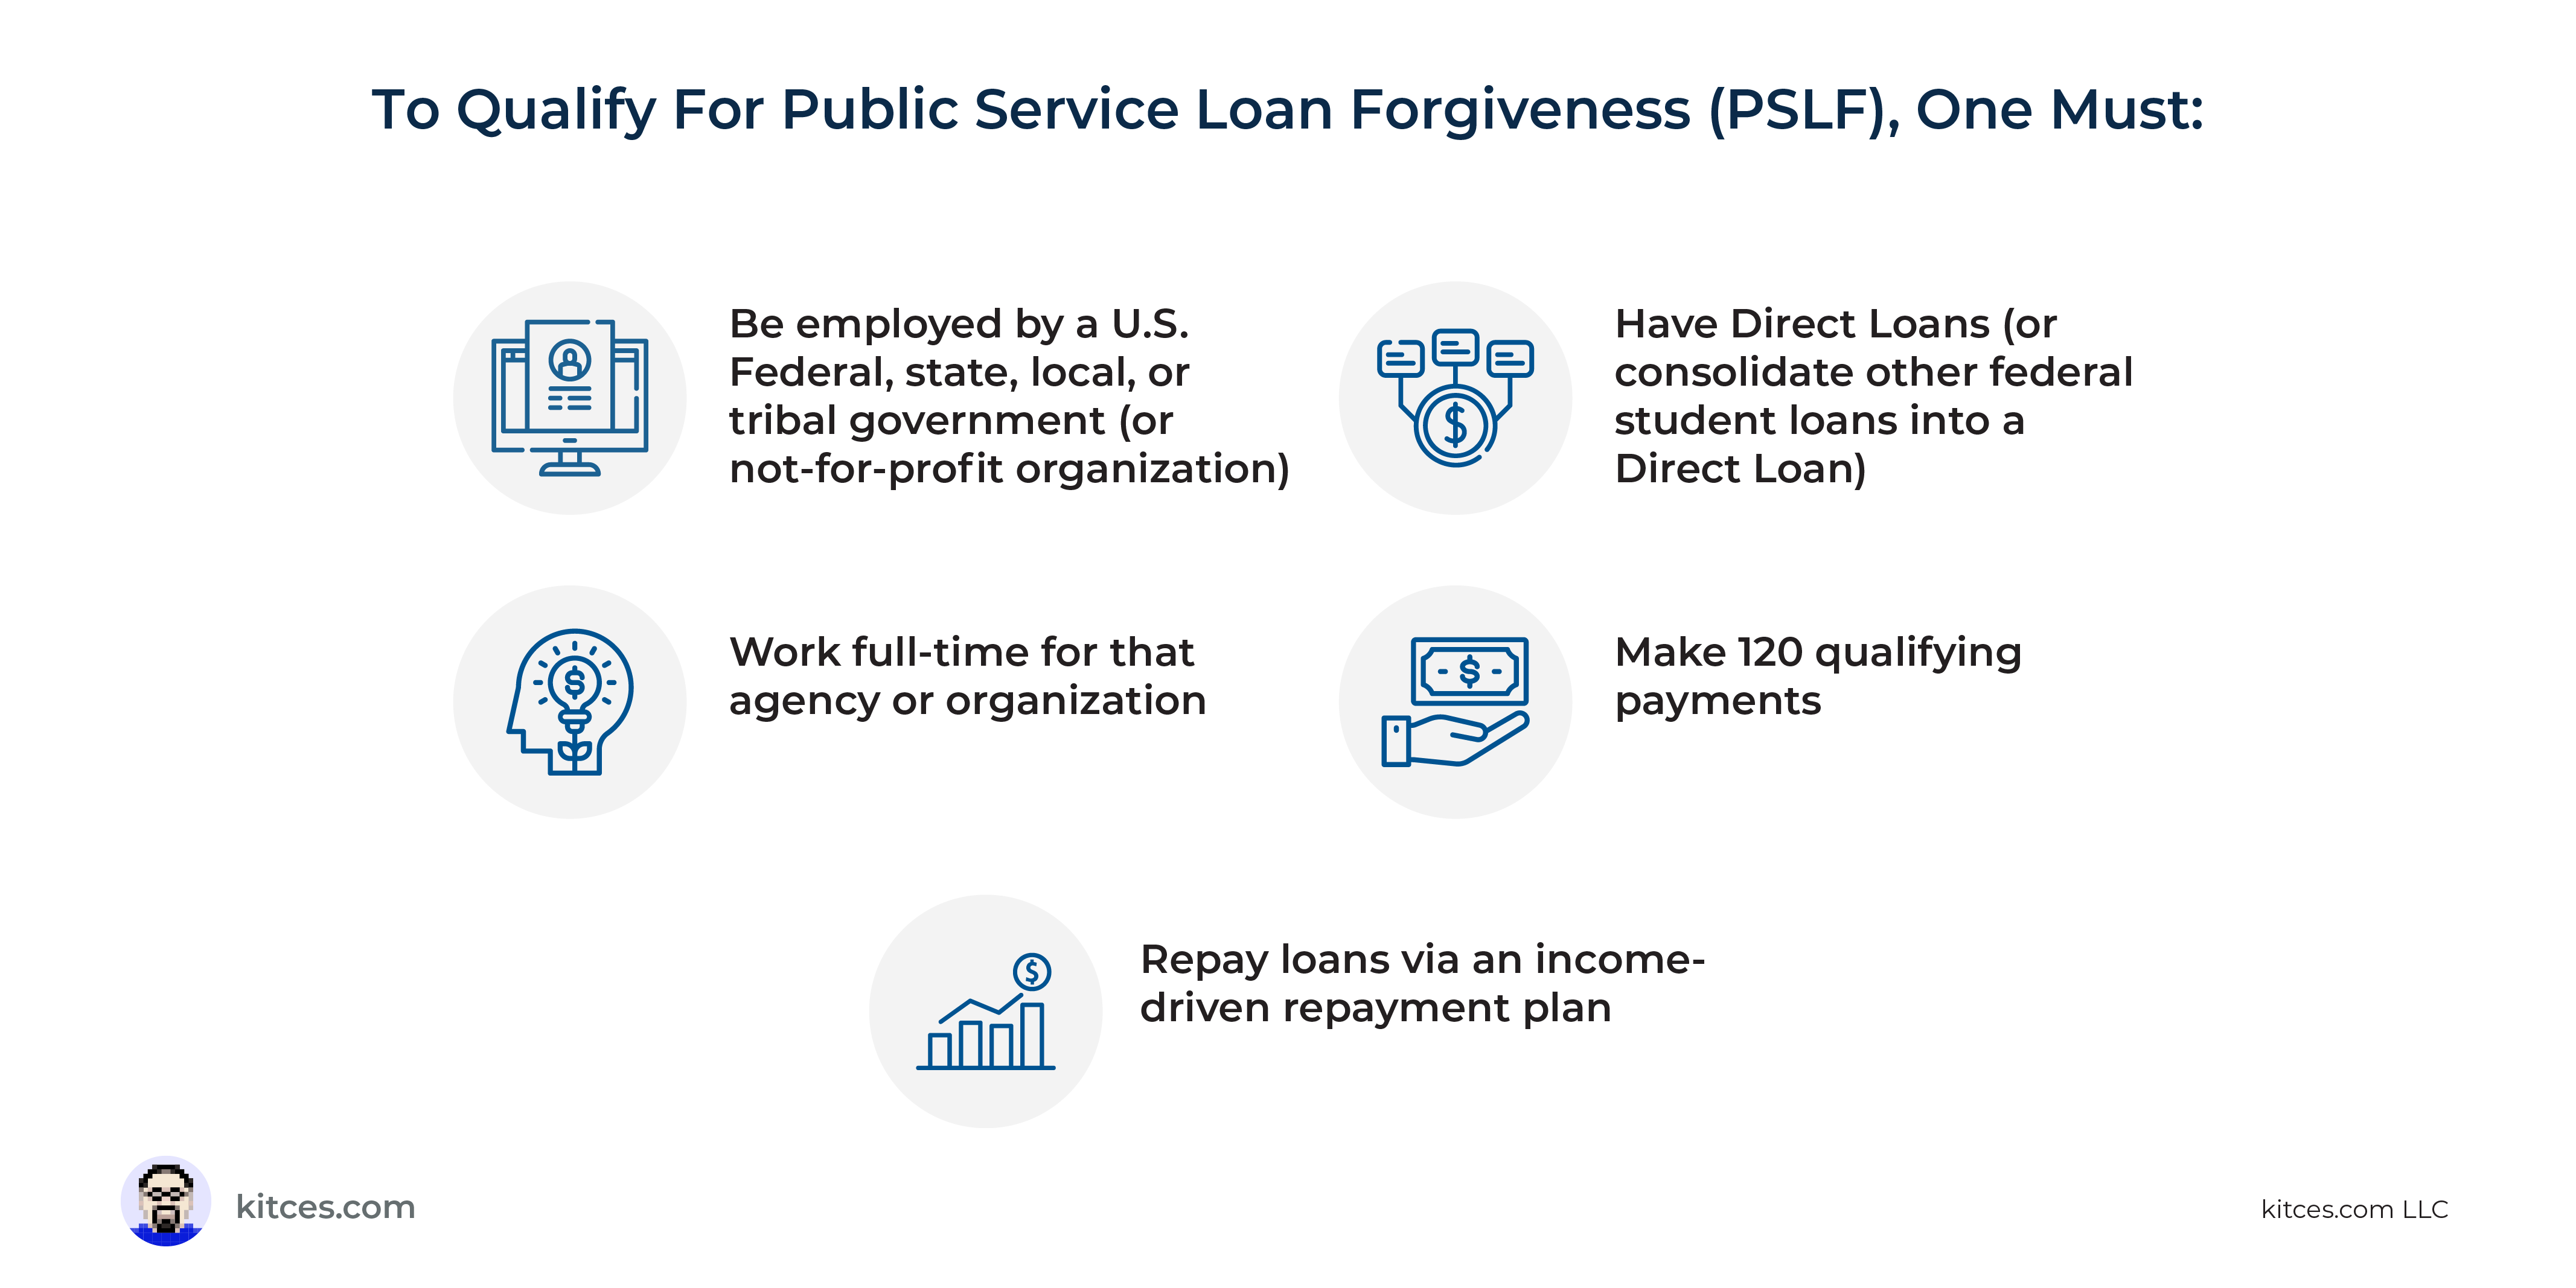 How To Take Advantage Of The Pslf Limited Waiver Opportunity